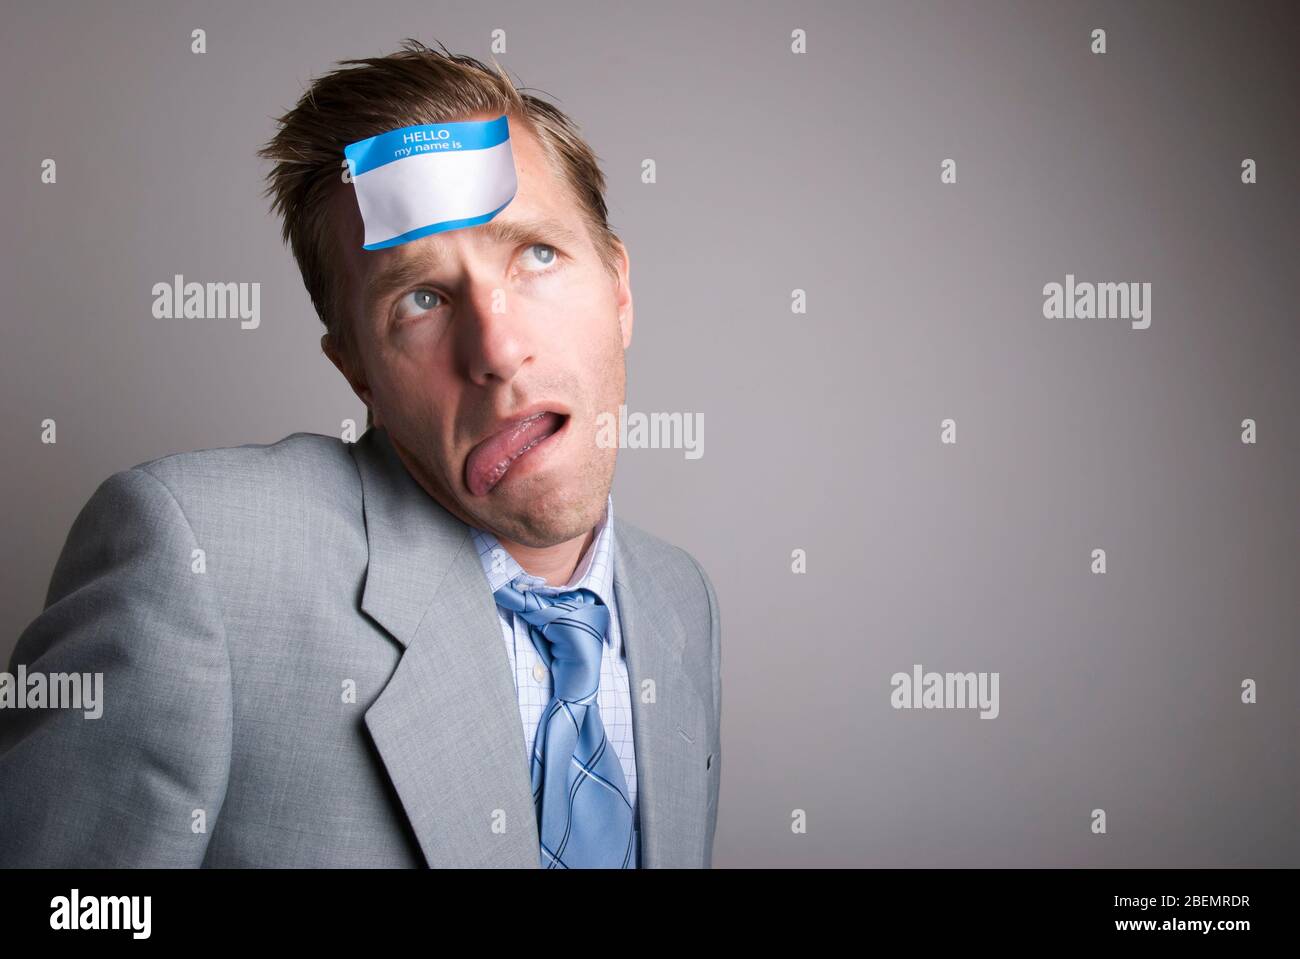 Confused businessman trying to figure out what to put on the blank name tag sticker on his forehead Stock Photo